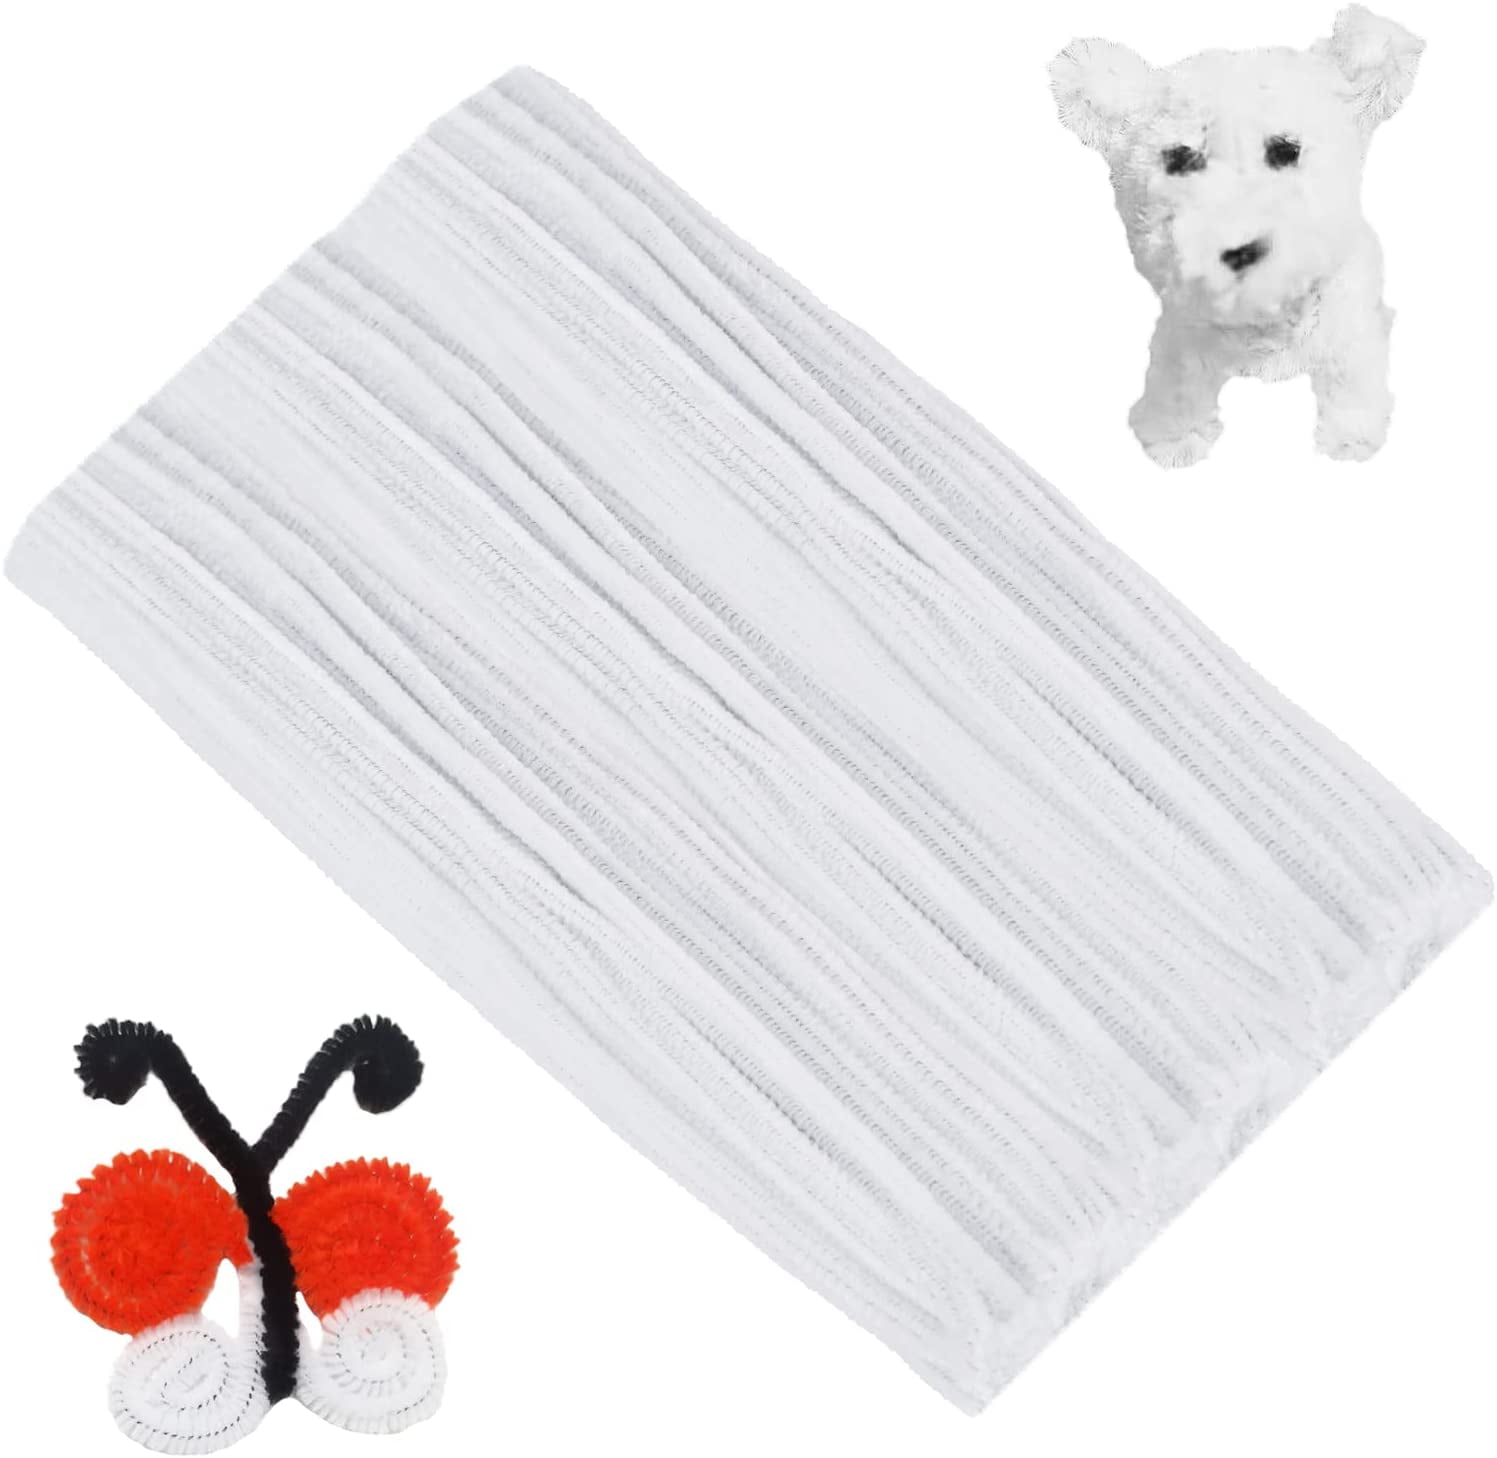 Menkey 400pcs White Pipe Cleaners Craft, Long Chenille Stems Bulk for DIY (6mm x 12 inch)